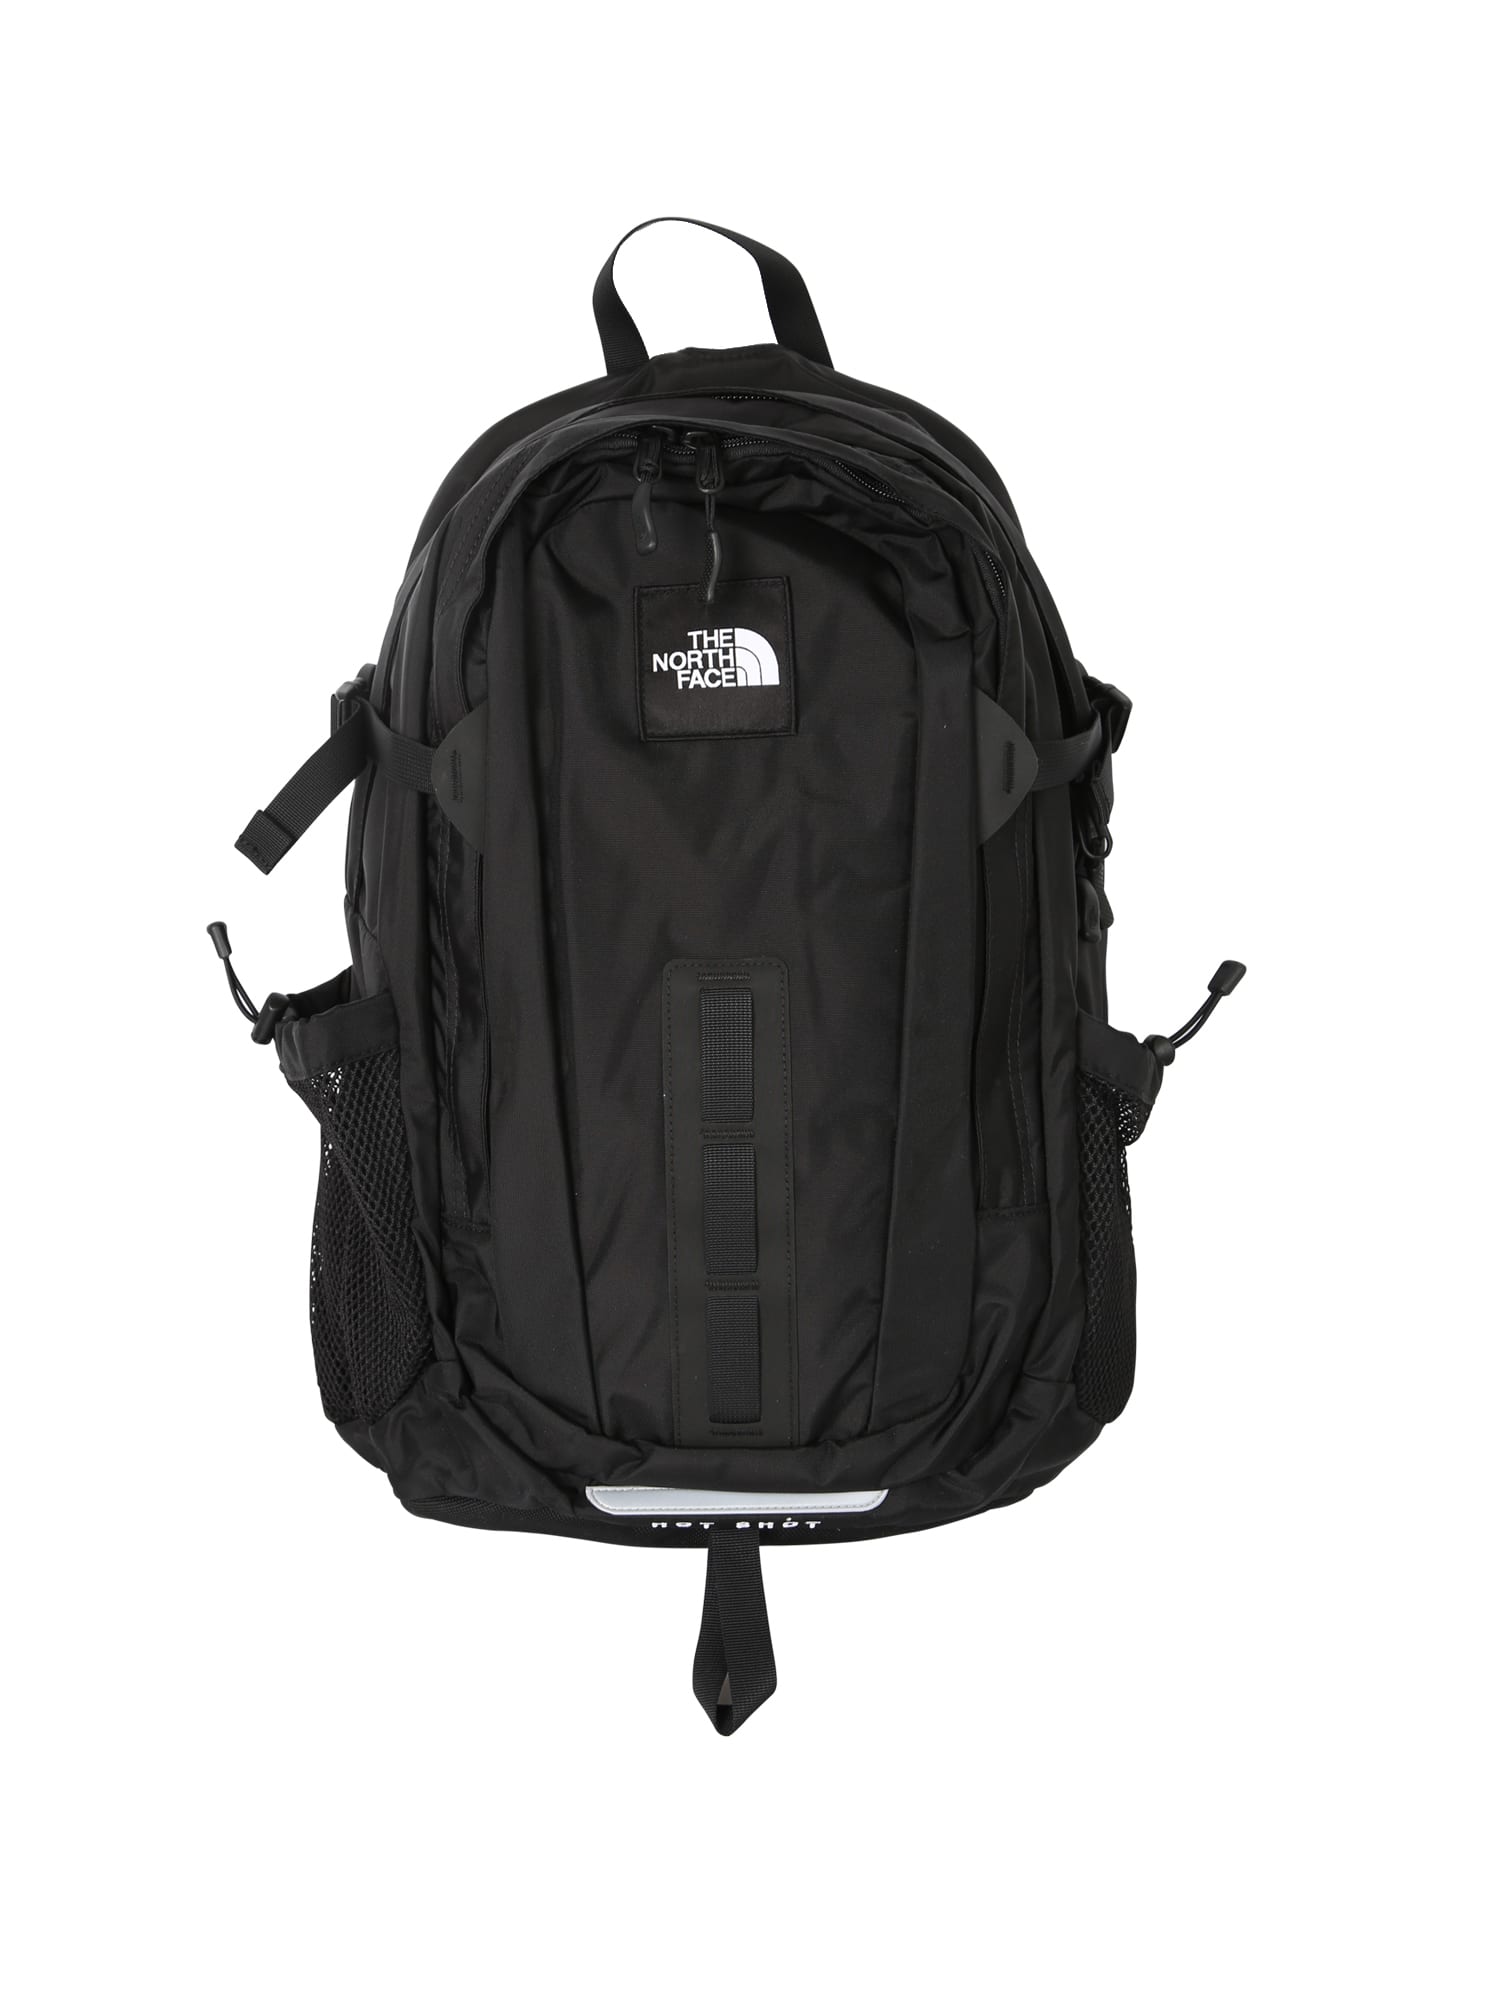 The North Face Logo Backpack